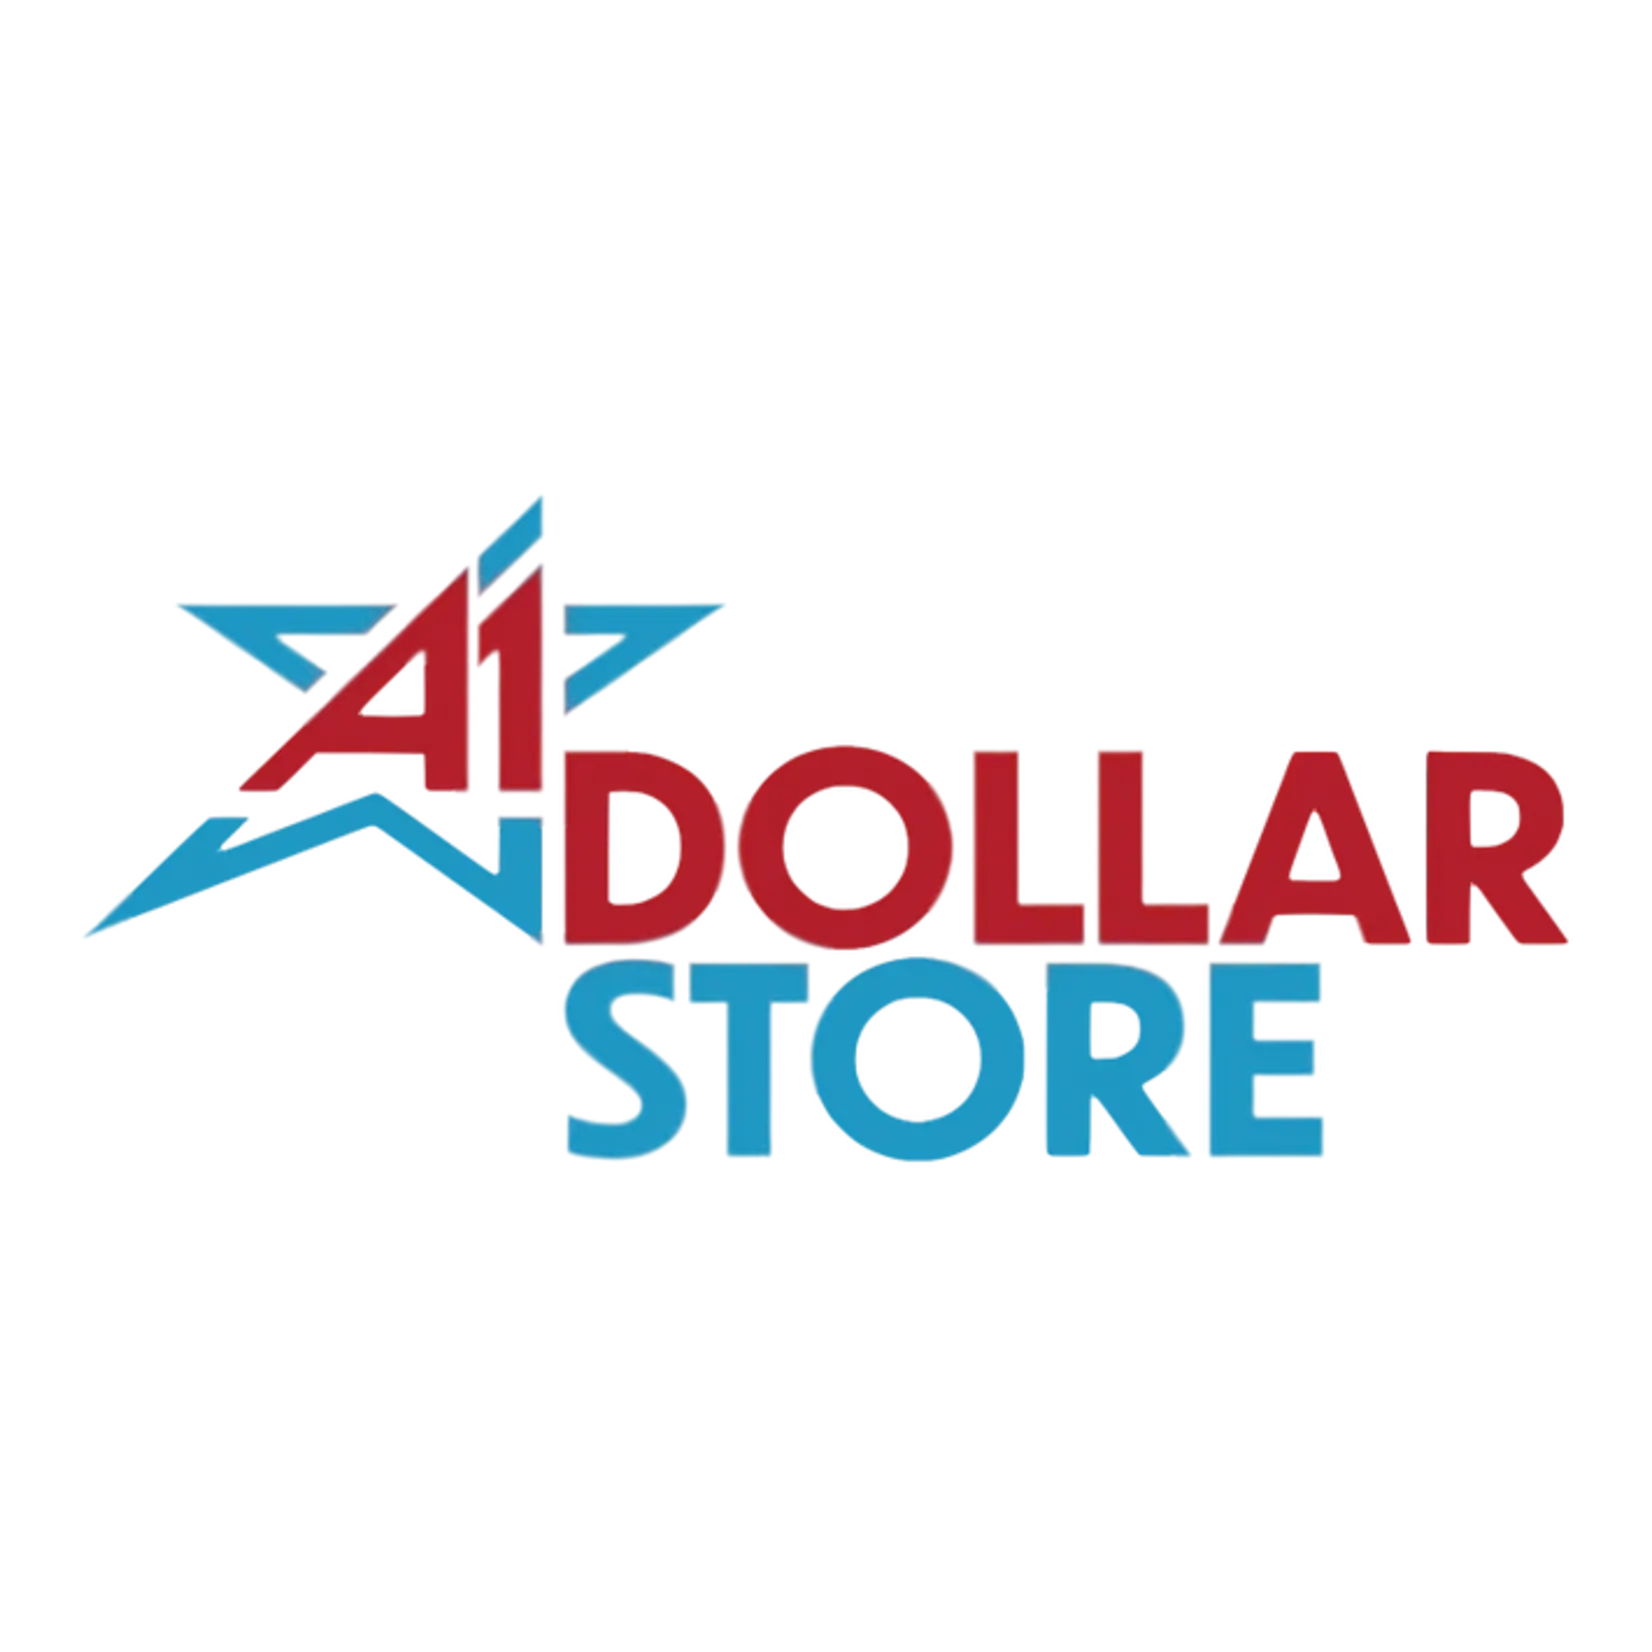 A1 Dollar Store A1 Dollar Store   $10 - Store Merchandise (EXP 60 DAYS)